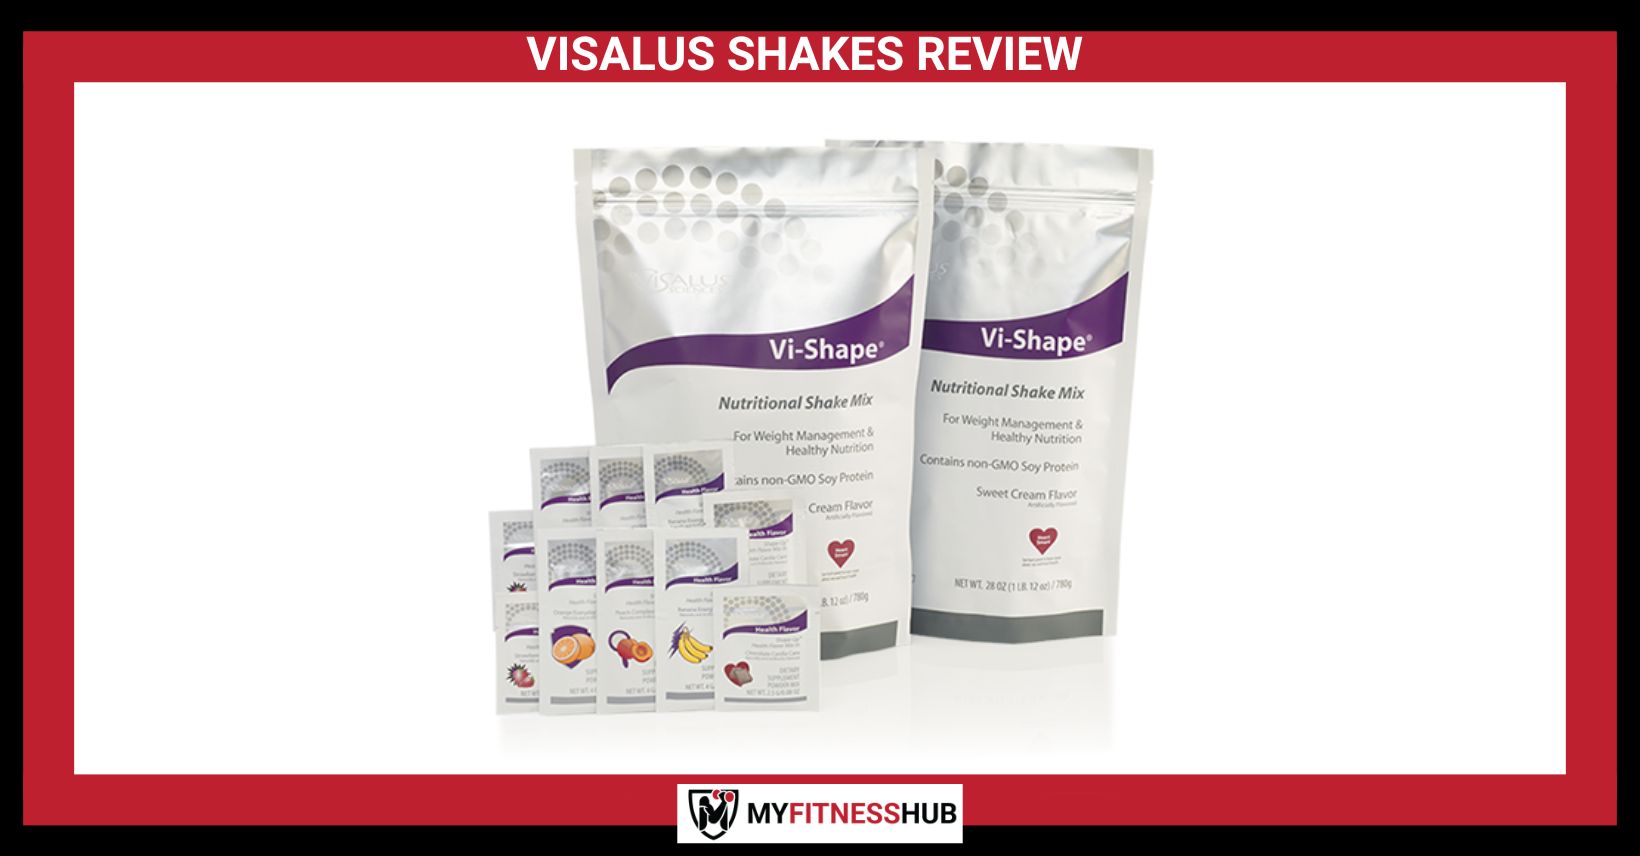 VISALUS SHAKES REVIEW – EVERYTHING YOU NEED TO KNOW